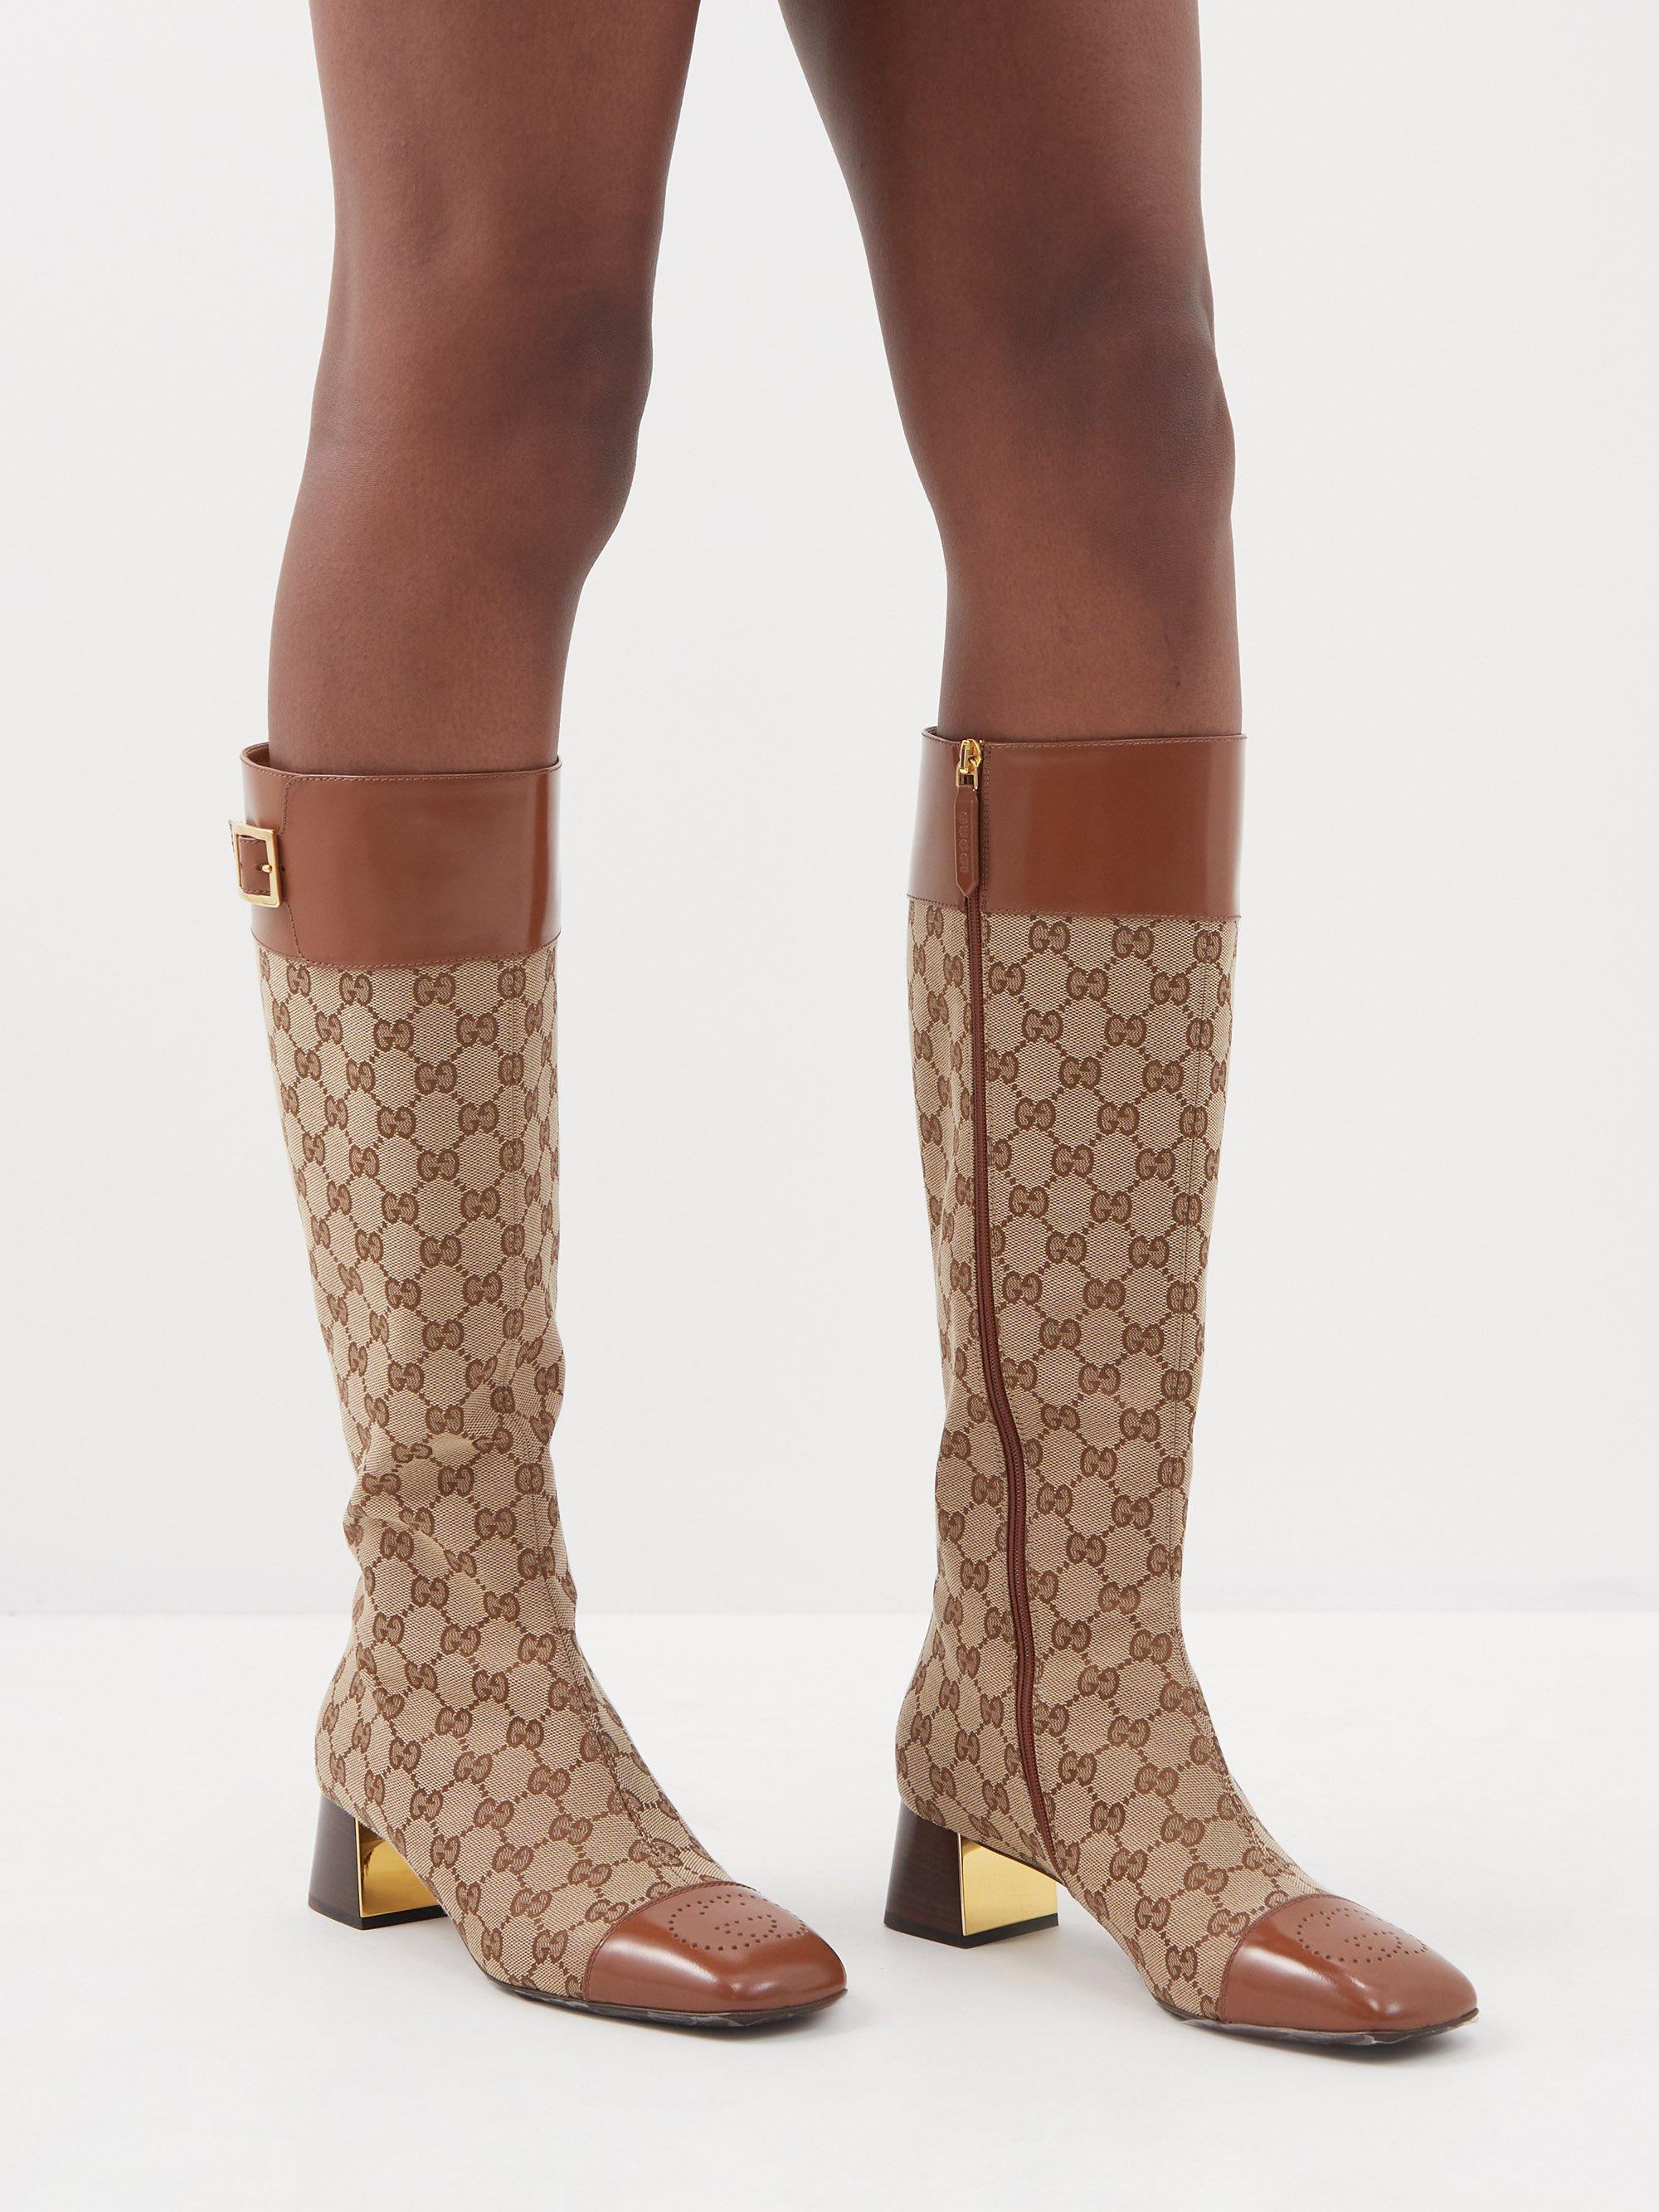 Gucci Ellis Gg-monogram Canvas Knee-high Boots in Natural | Lyst